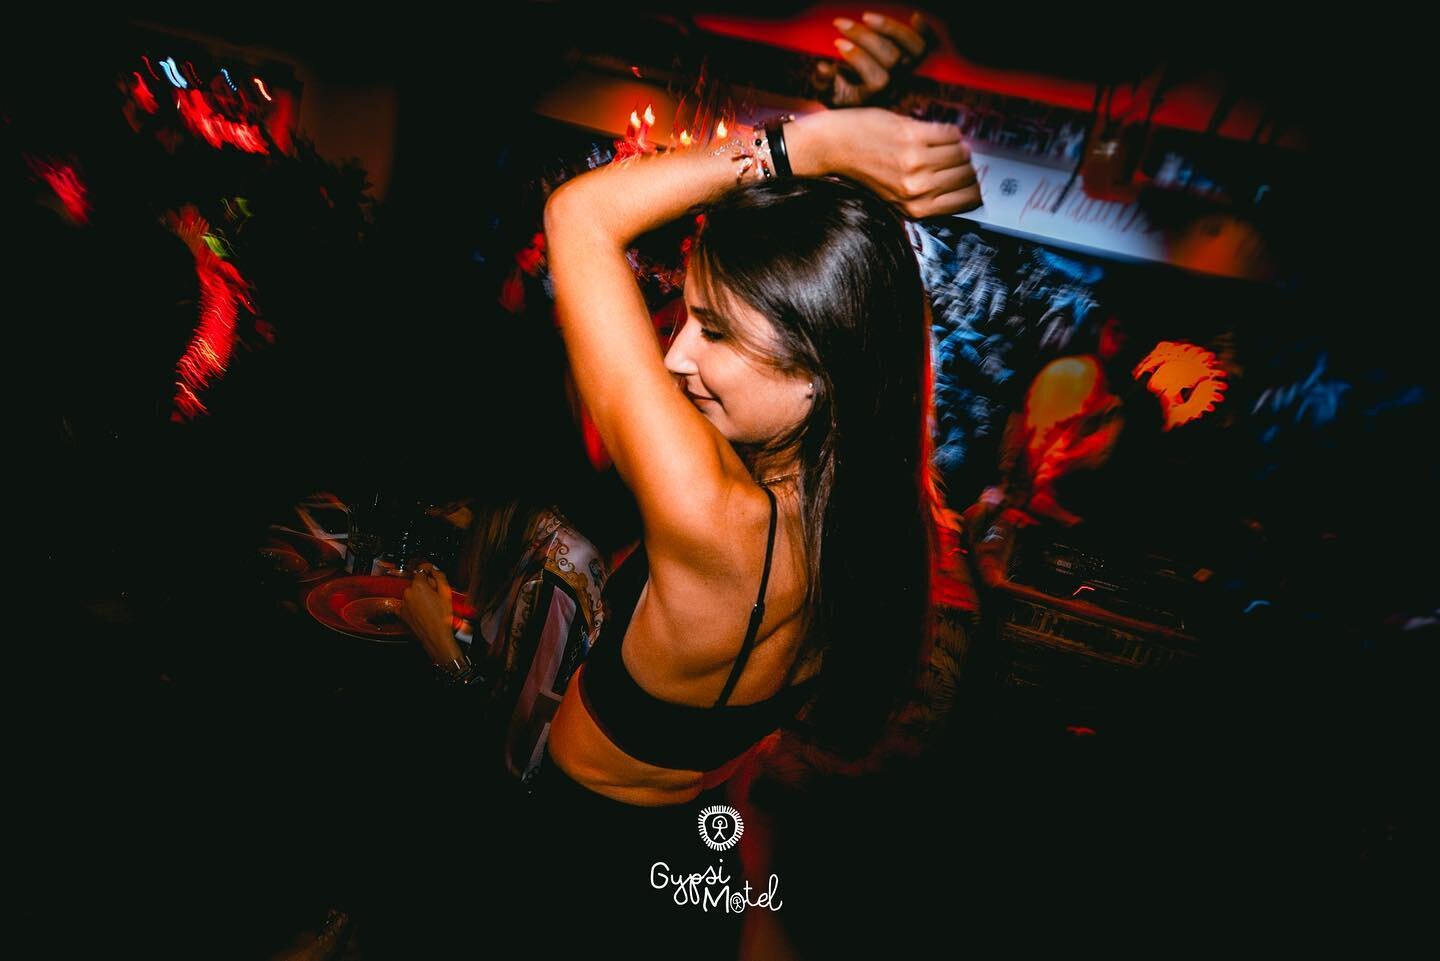 Gypsi Fever ✨

Open from 7:30pm to 2am 🌹

.
.
.
.

#party #partytime #music #love #instagood #partymusic #partying #partynight #partydress #partyideas #partylife #fun #photooftheday #friends partydecor #beats #partyband #partynextdoor #song #good